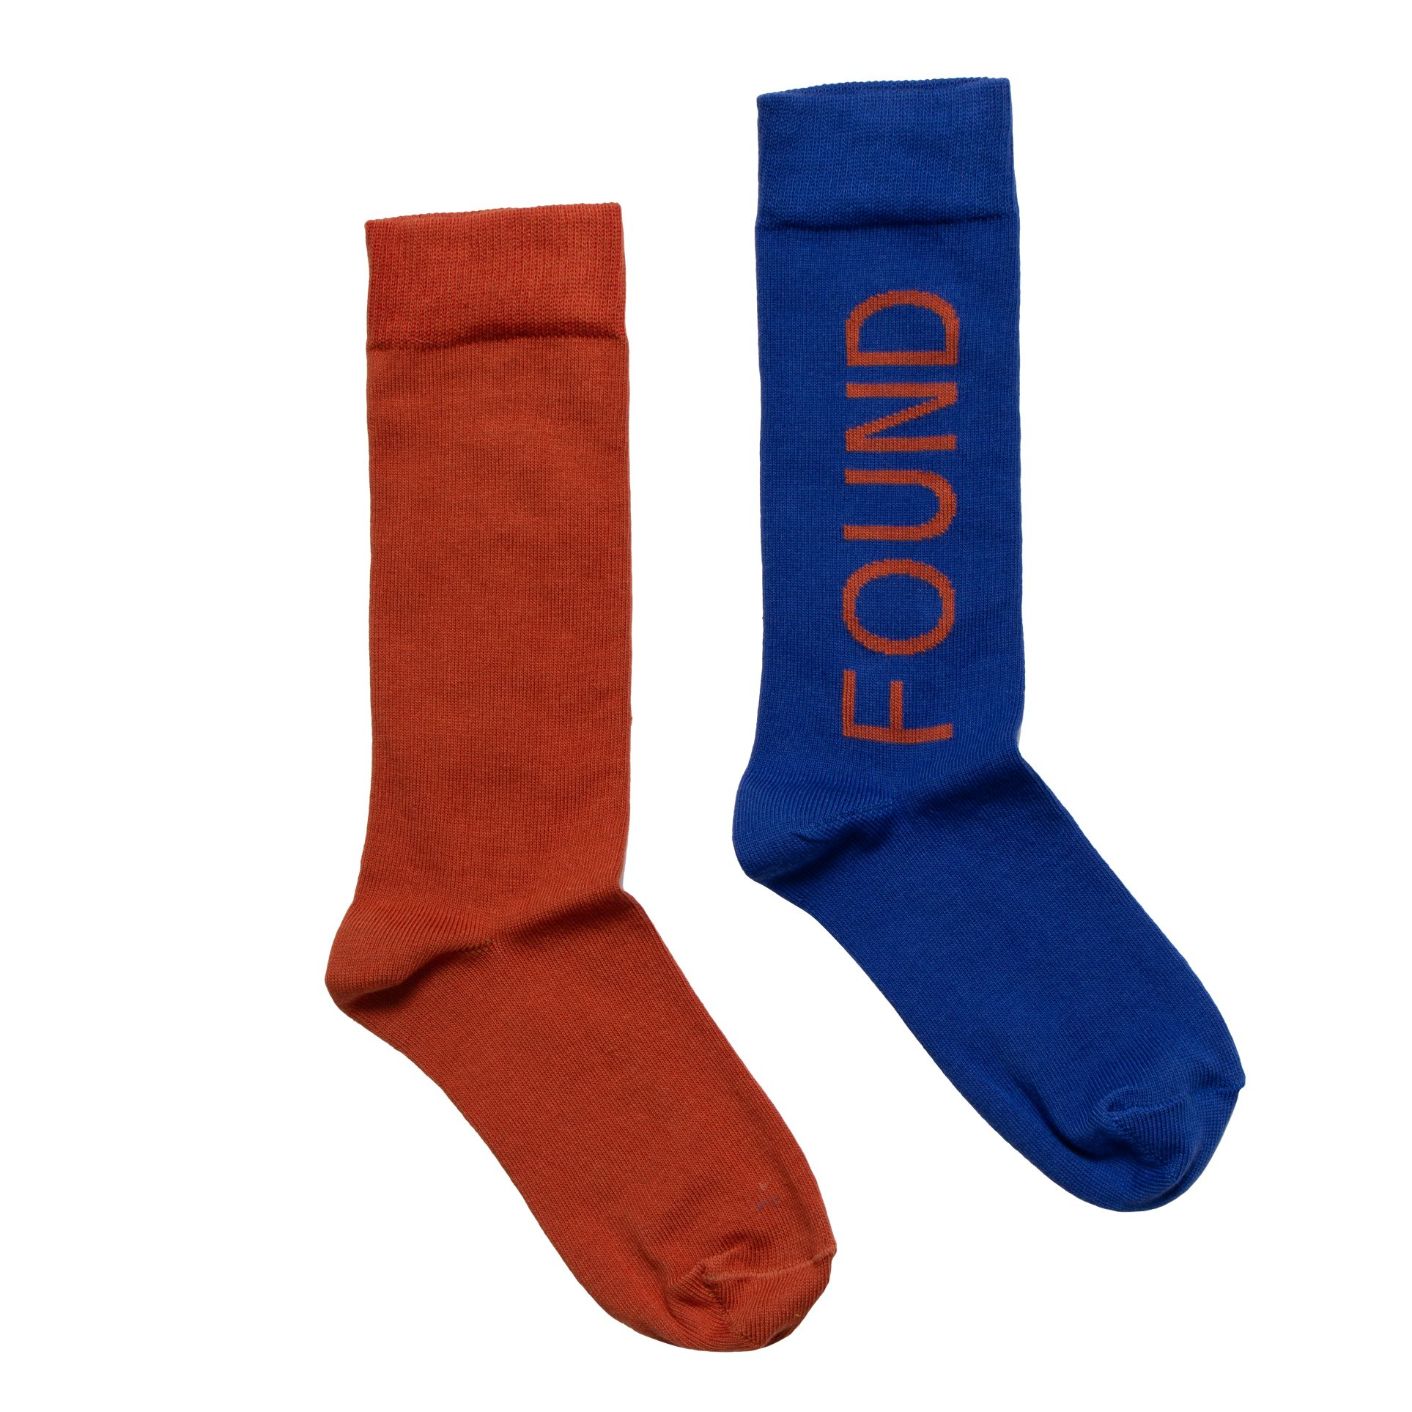 Lost Found Sock- Winter Gold / Discovery Blue